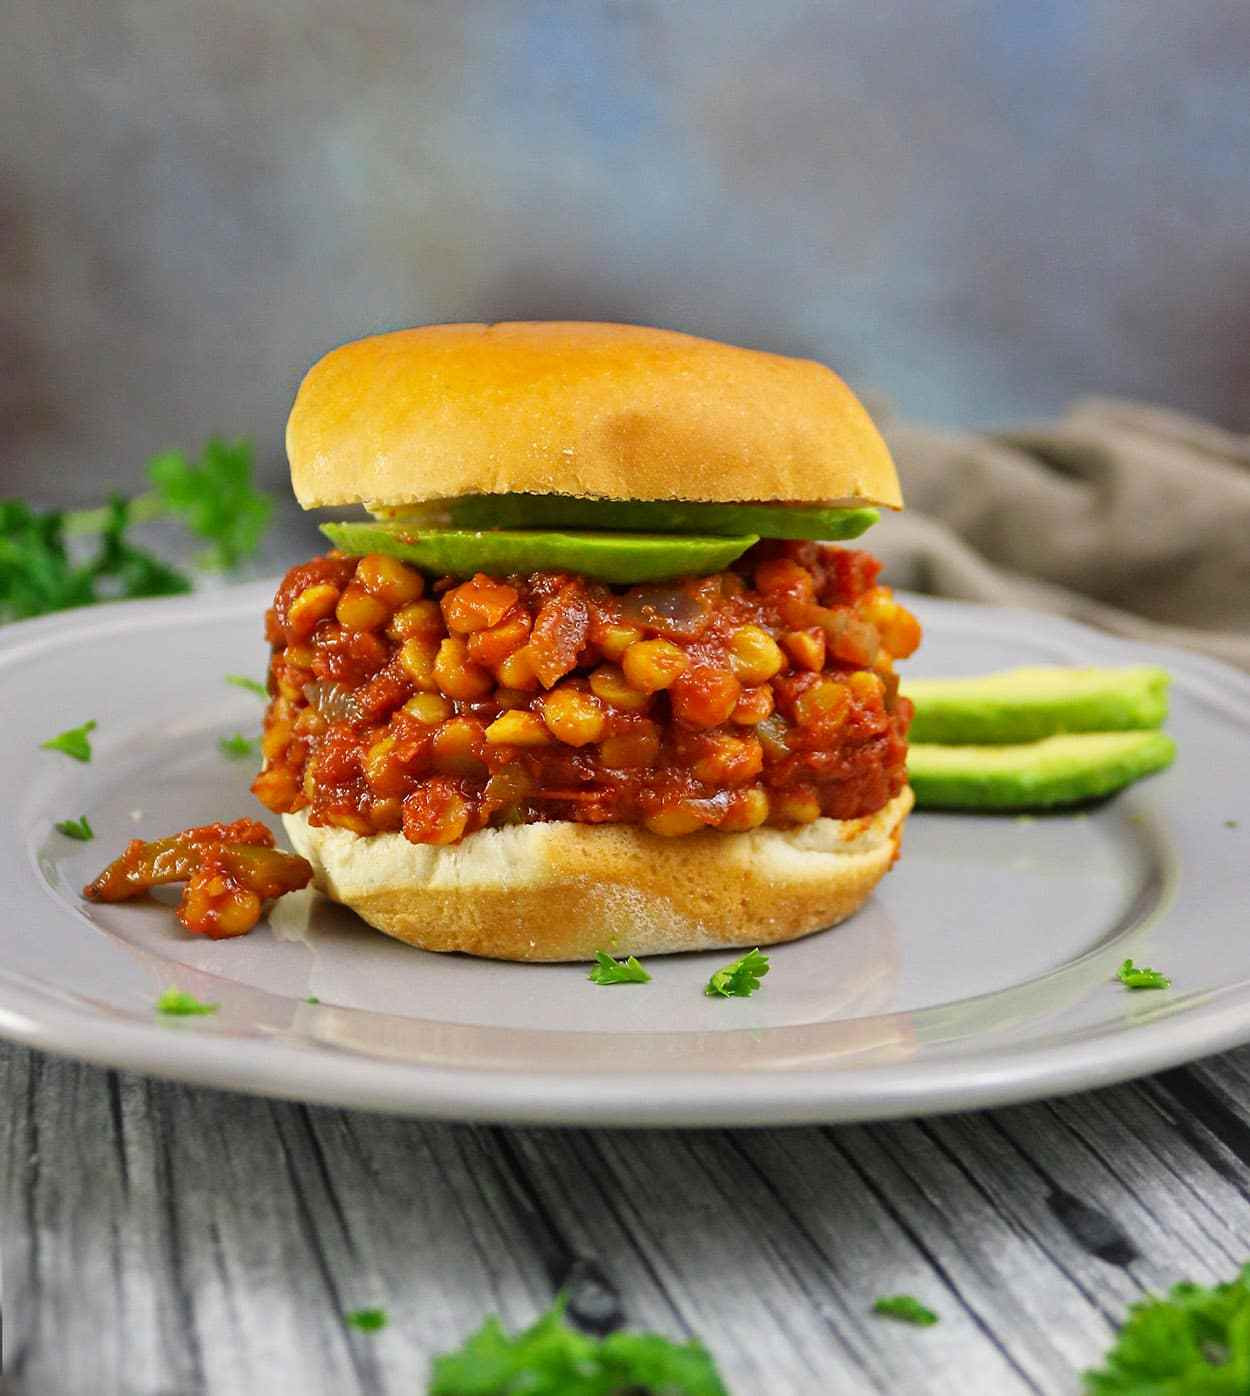 Vegetarian Sloppy Joes
 Hearty Ve arian Sloppy Joes With Beer for Gameday